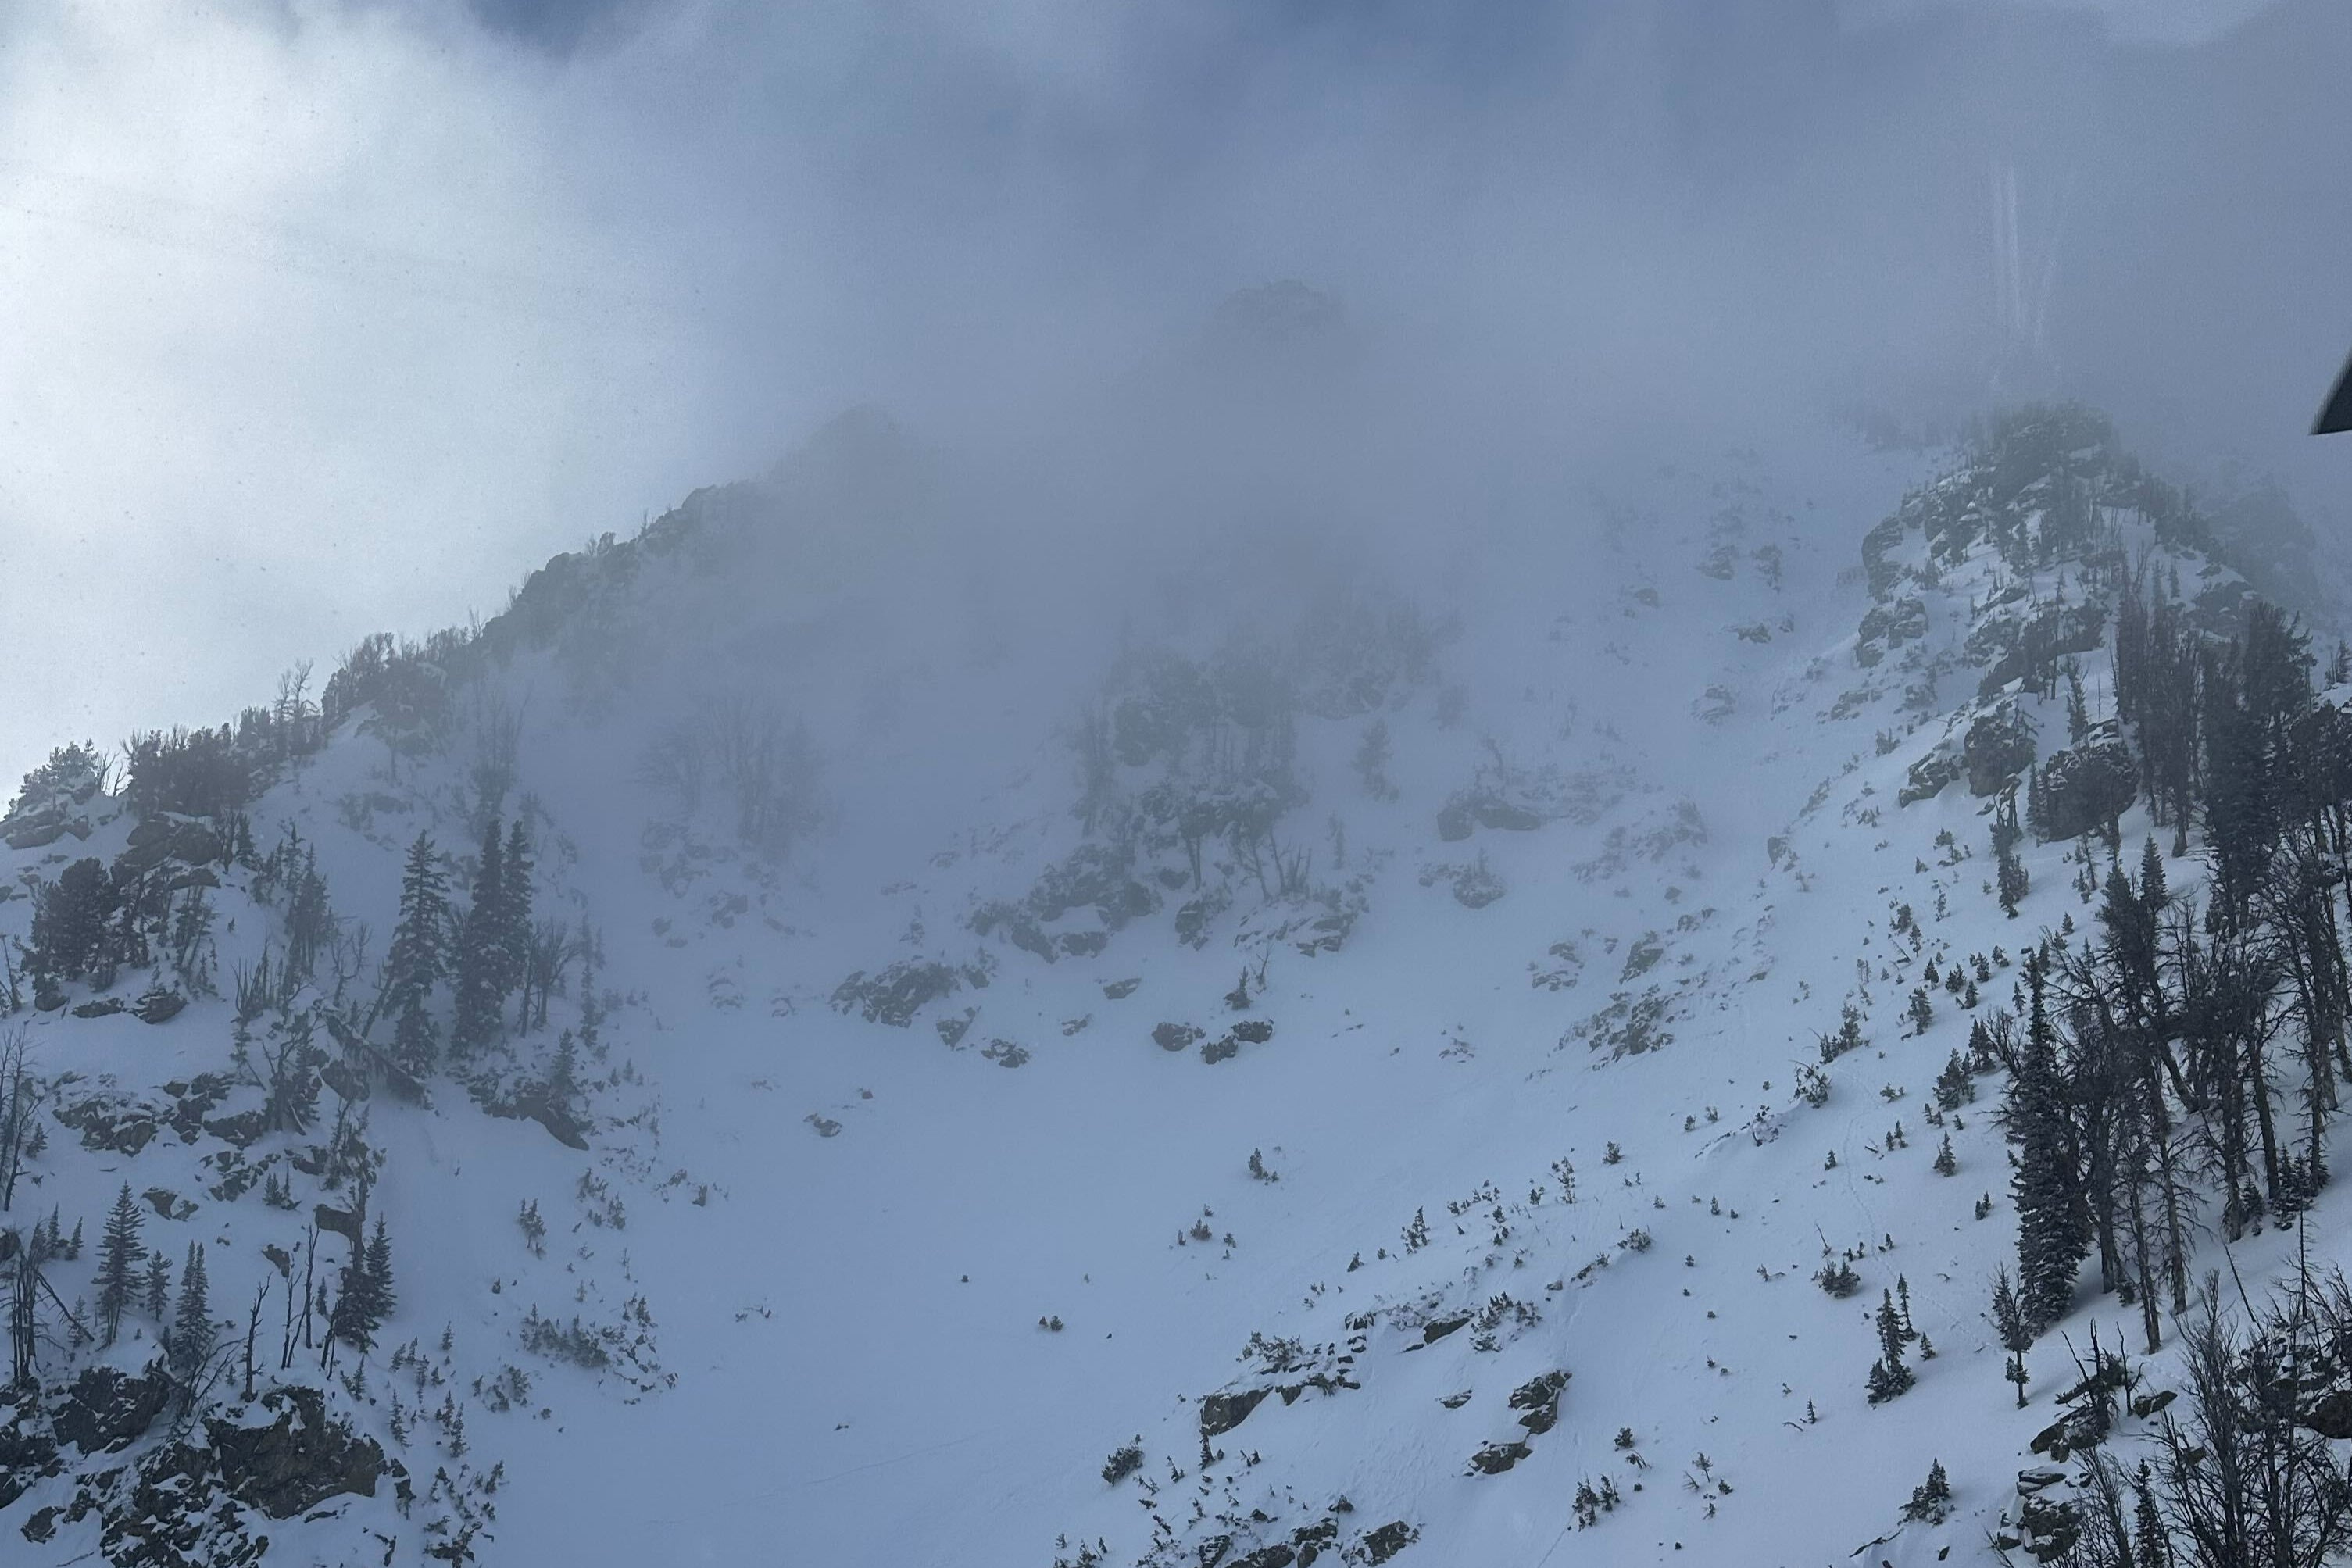 The skier, who was in the Grand Teton National Park, sustained serious injuries